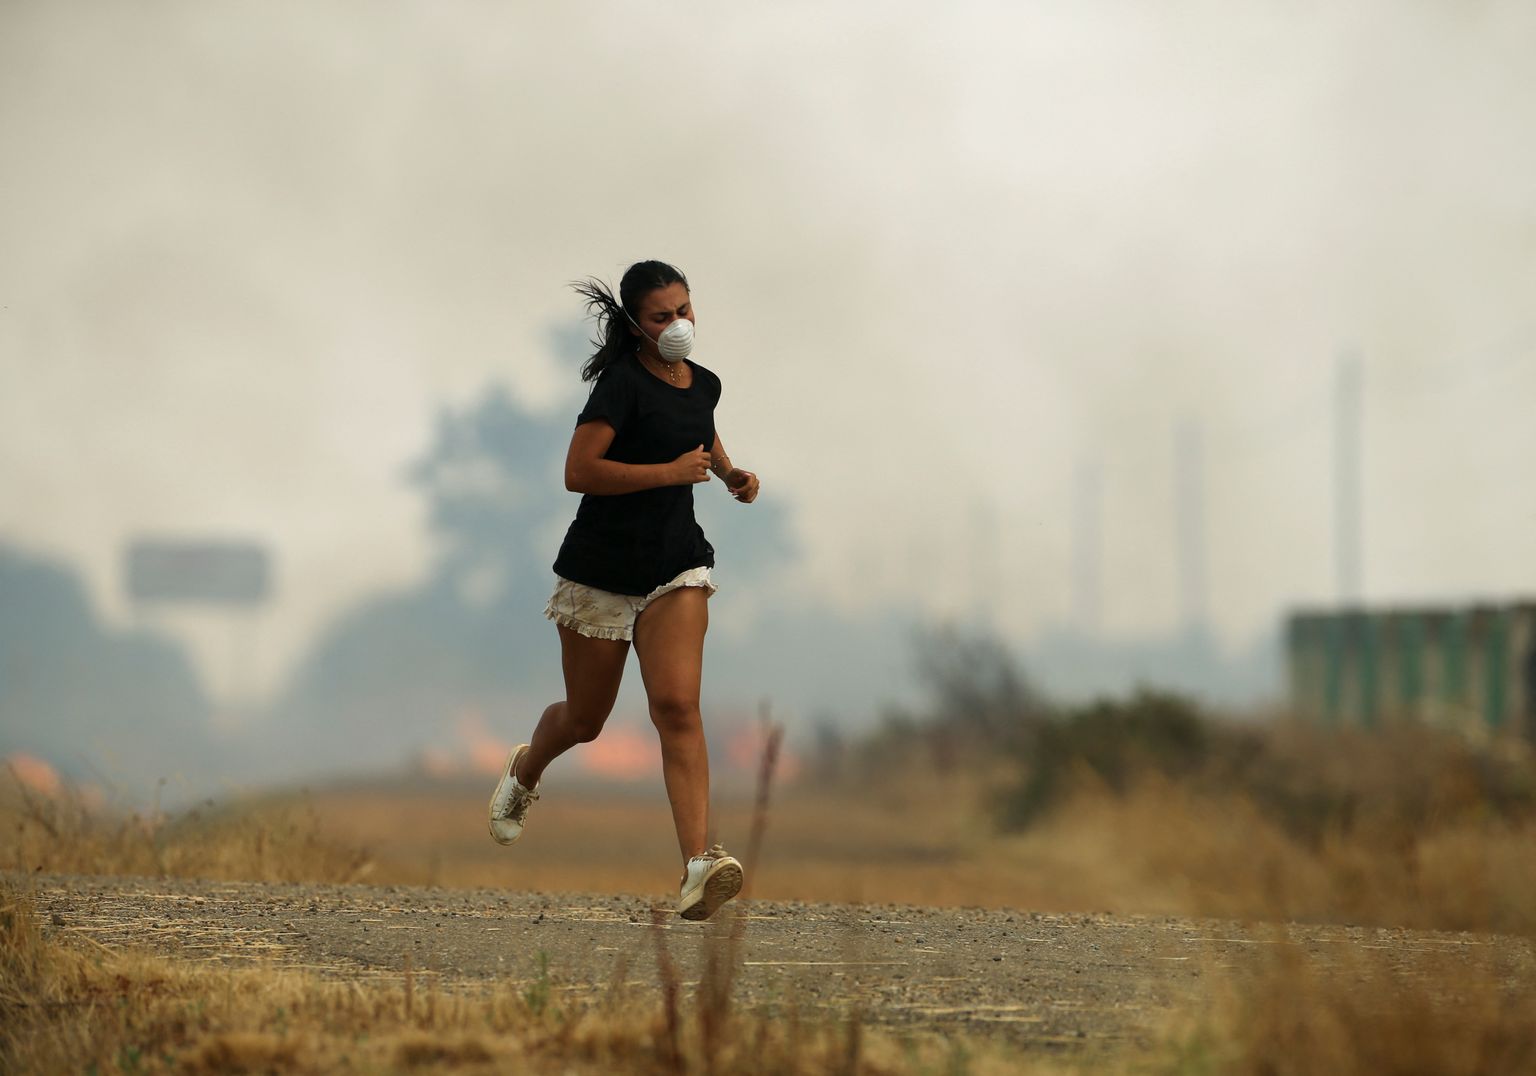 A girl runs away from a fire in a wheat field in Tabara, Zamora, on the second heatwave of the year, in Spain, July 18, 2022. REUTERS/Isabel Infantes